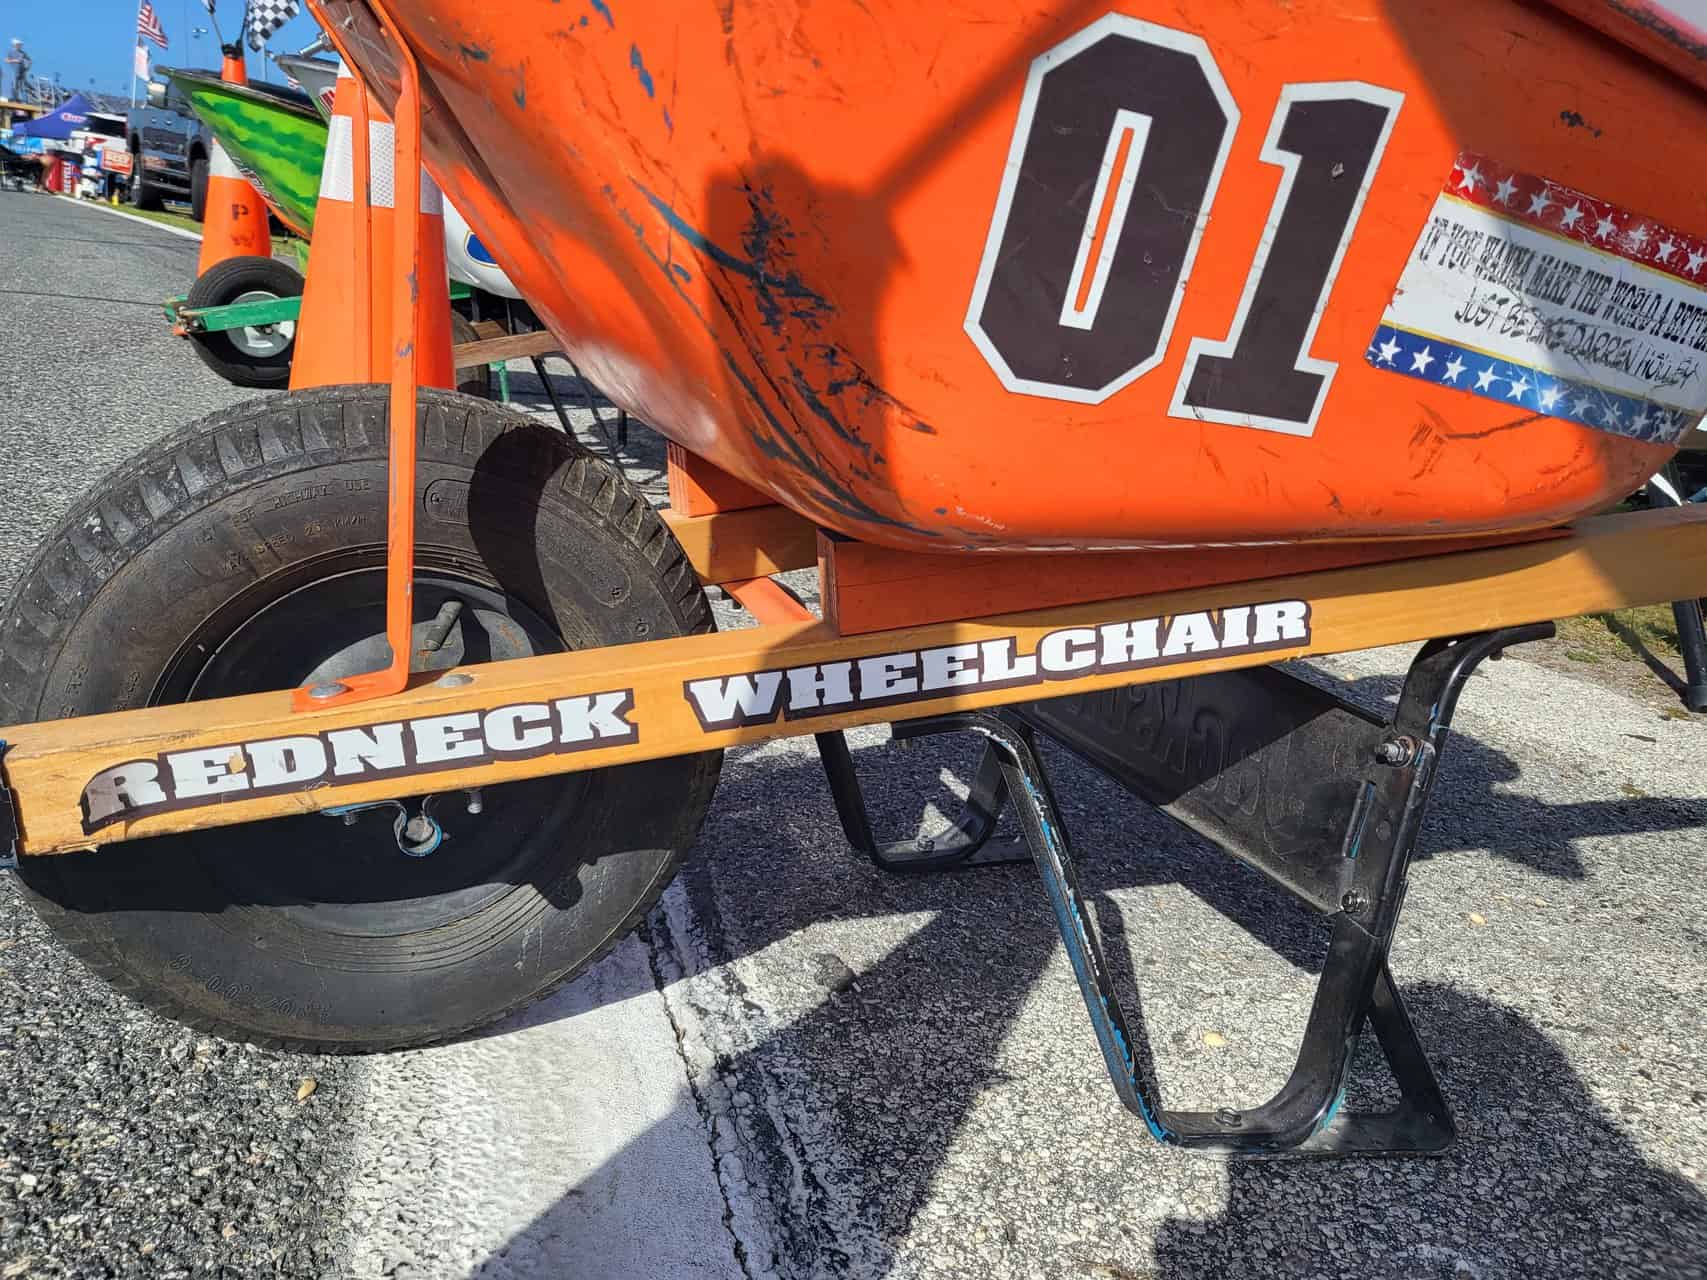 The dukes of hazzard wheelbarrow running the general lee colors is officially nicknamed the "redneck wheelchair. " photo by justin schuoler.